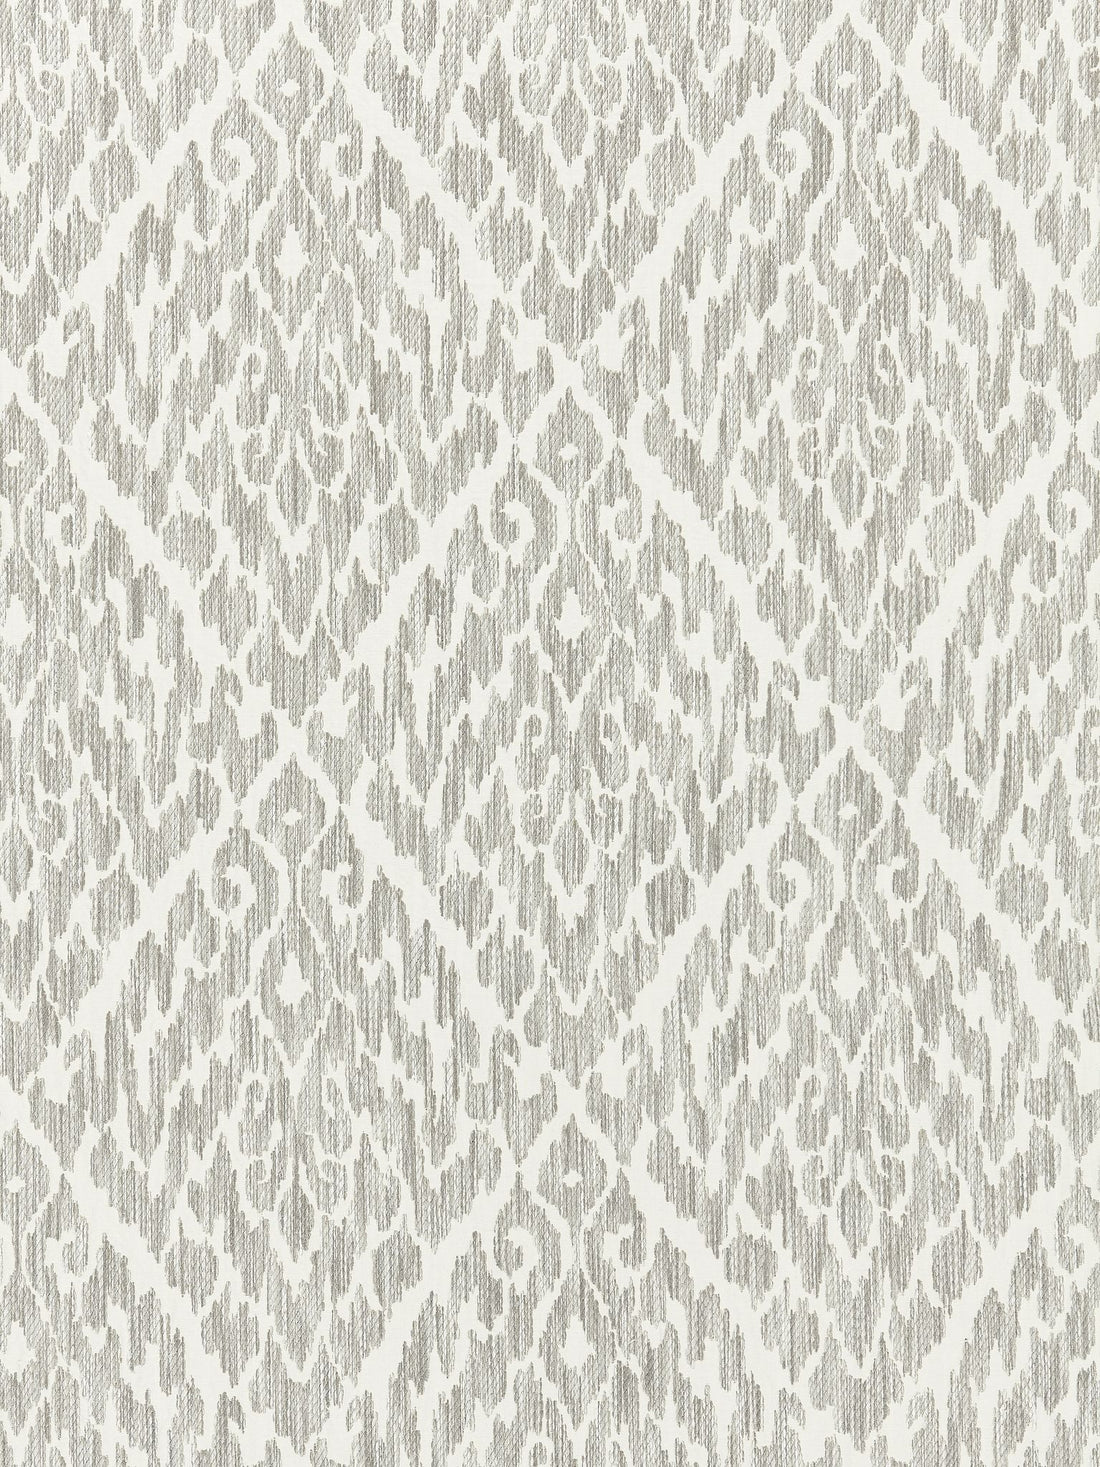 Lhasa Ikat Weave fabric in greige color - pattern number SC 000127169 - by Scalamandre in the Scalamandre Fabrics Book 1 collection